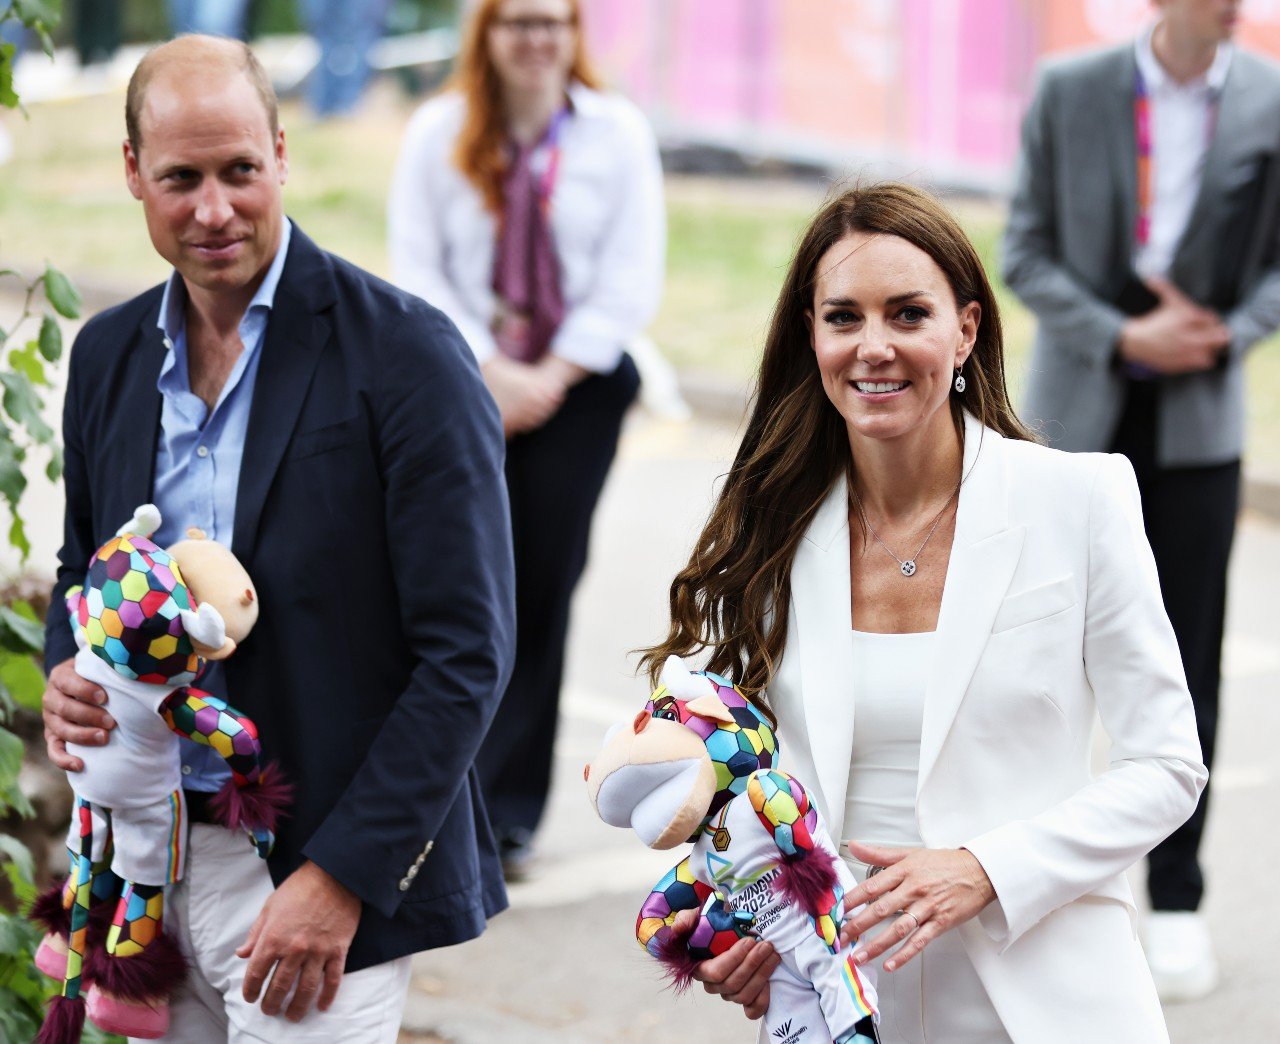 Kate Middleton ‘Takes the Lead’ While Prince William ‘Not as Confident’ During Royal Engagement Says Body Language Expert